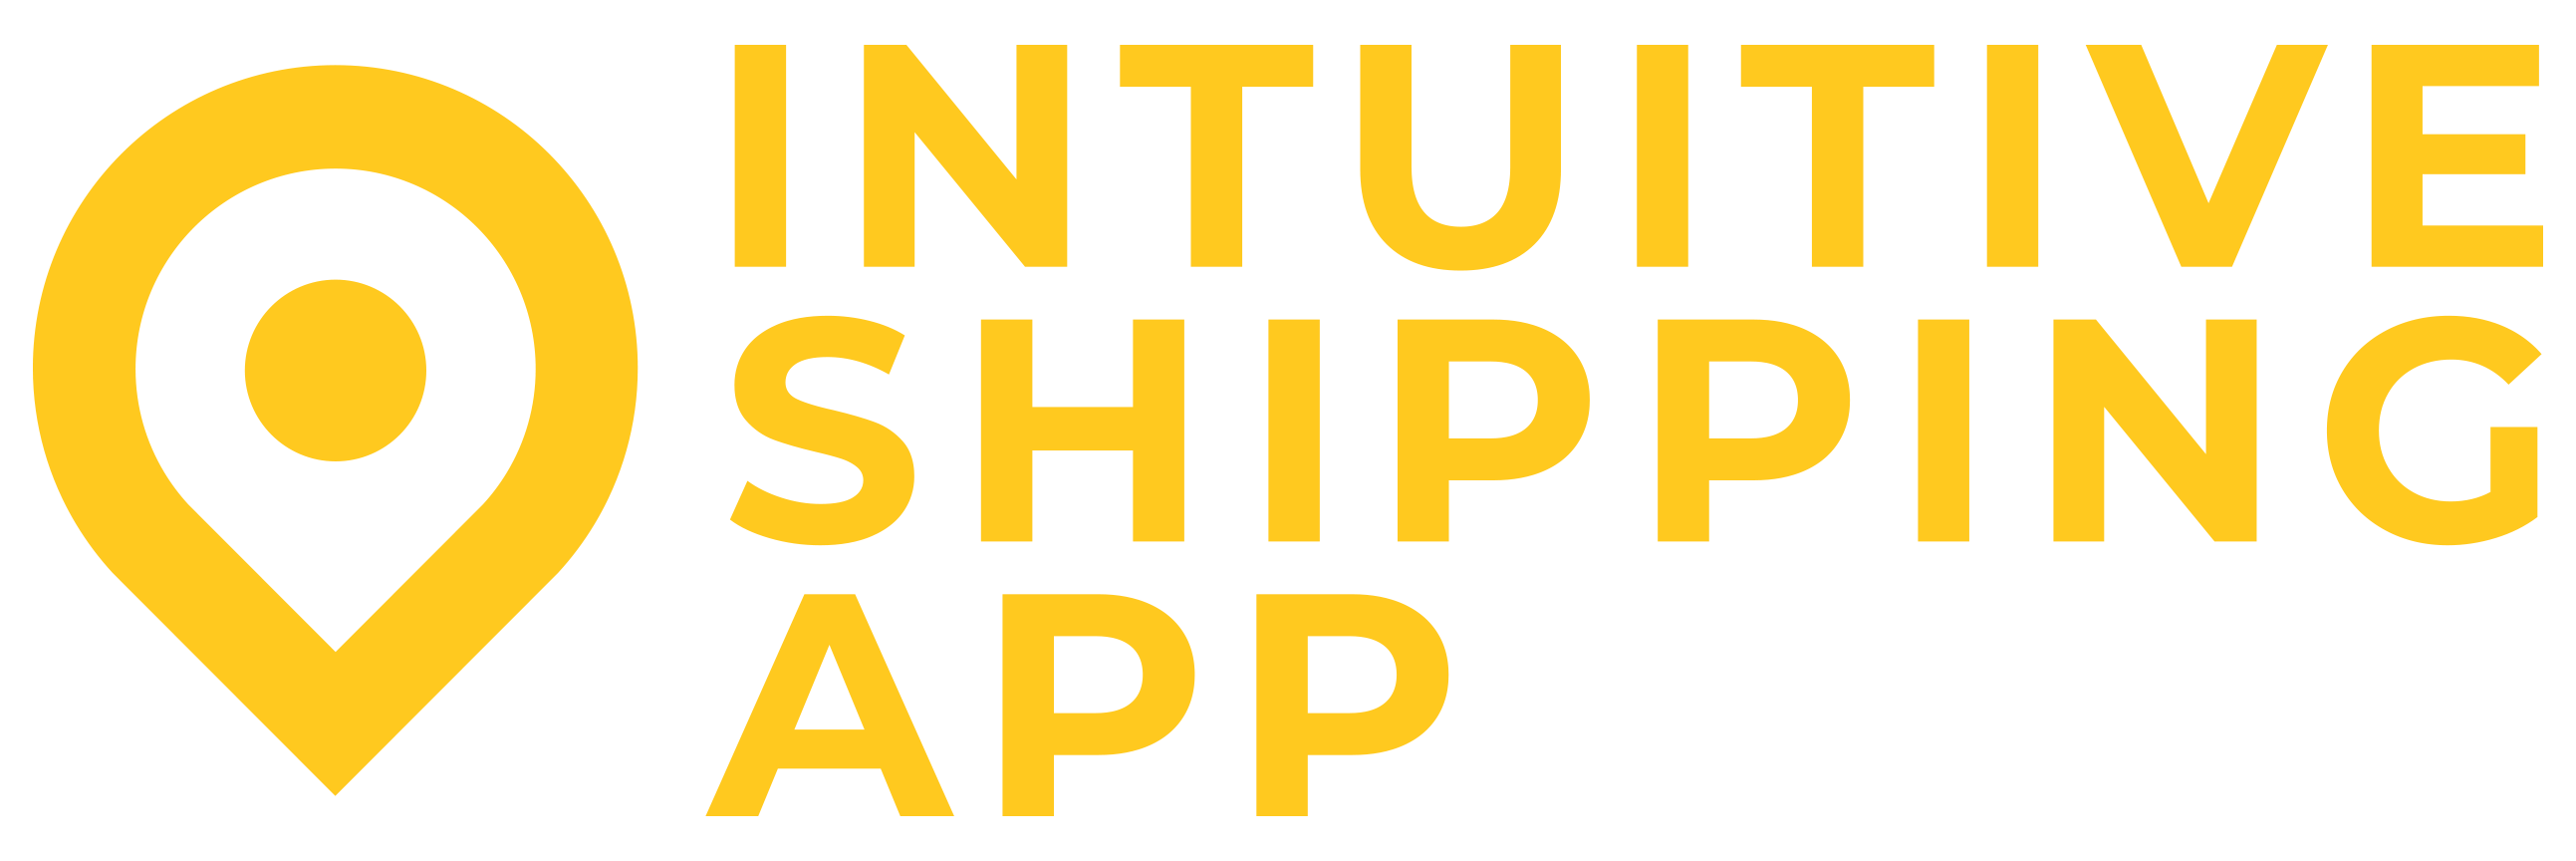 Intuitive Shipping Help Center